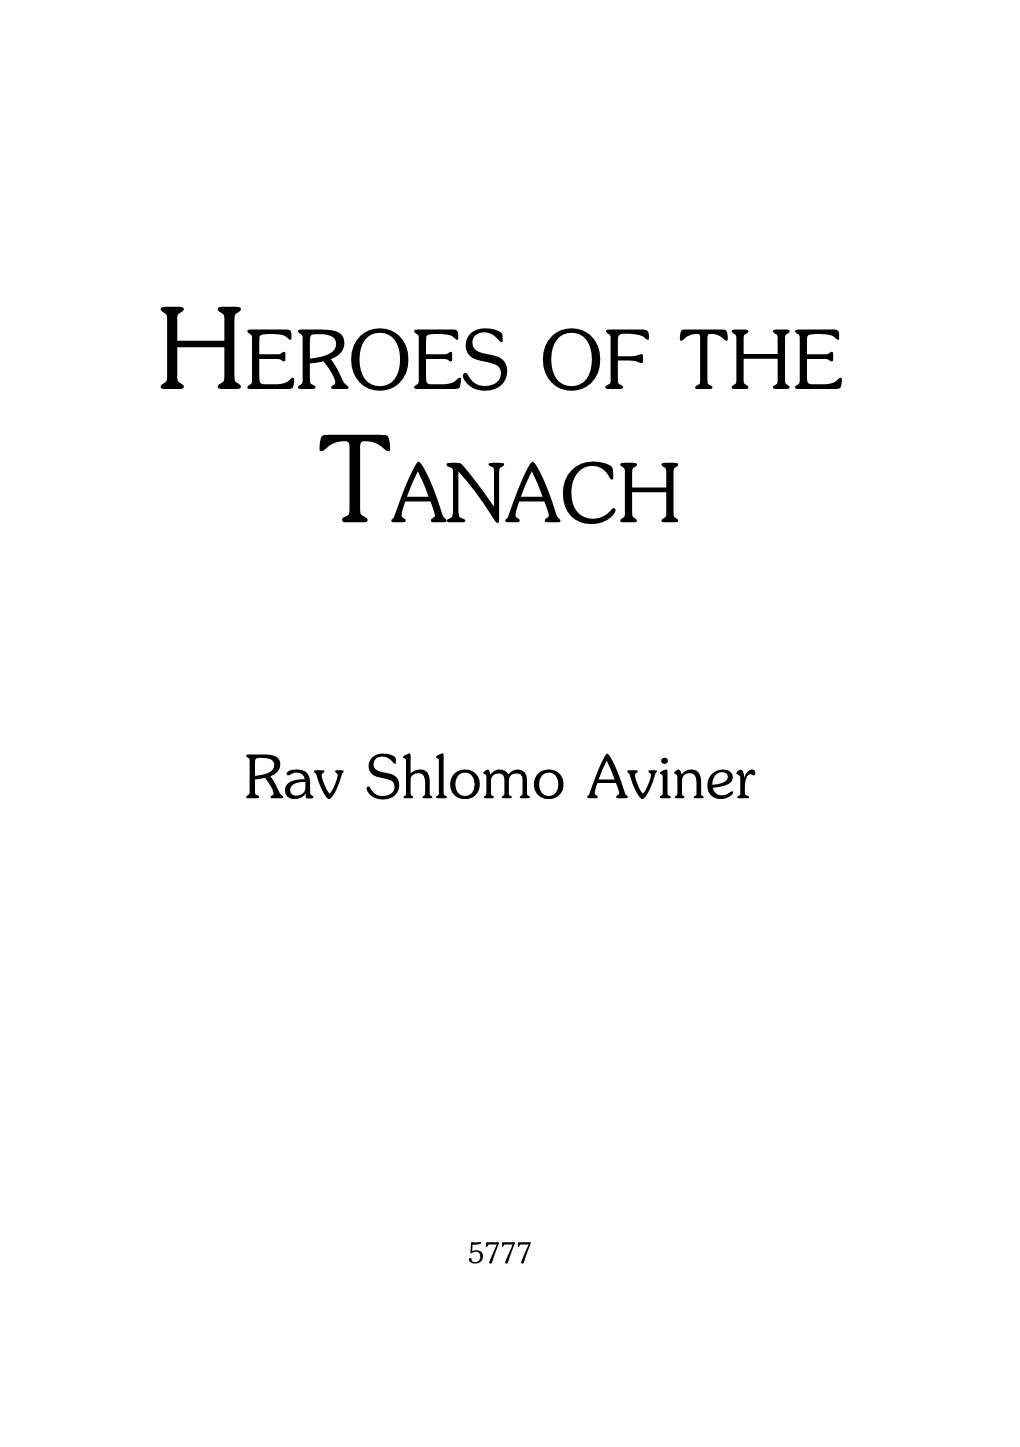 Heroes of the Tanach